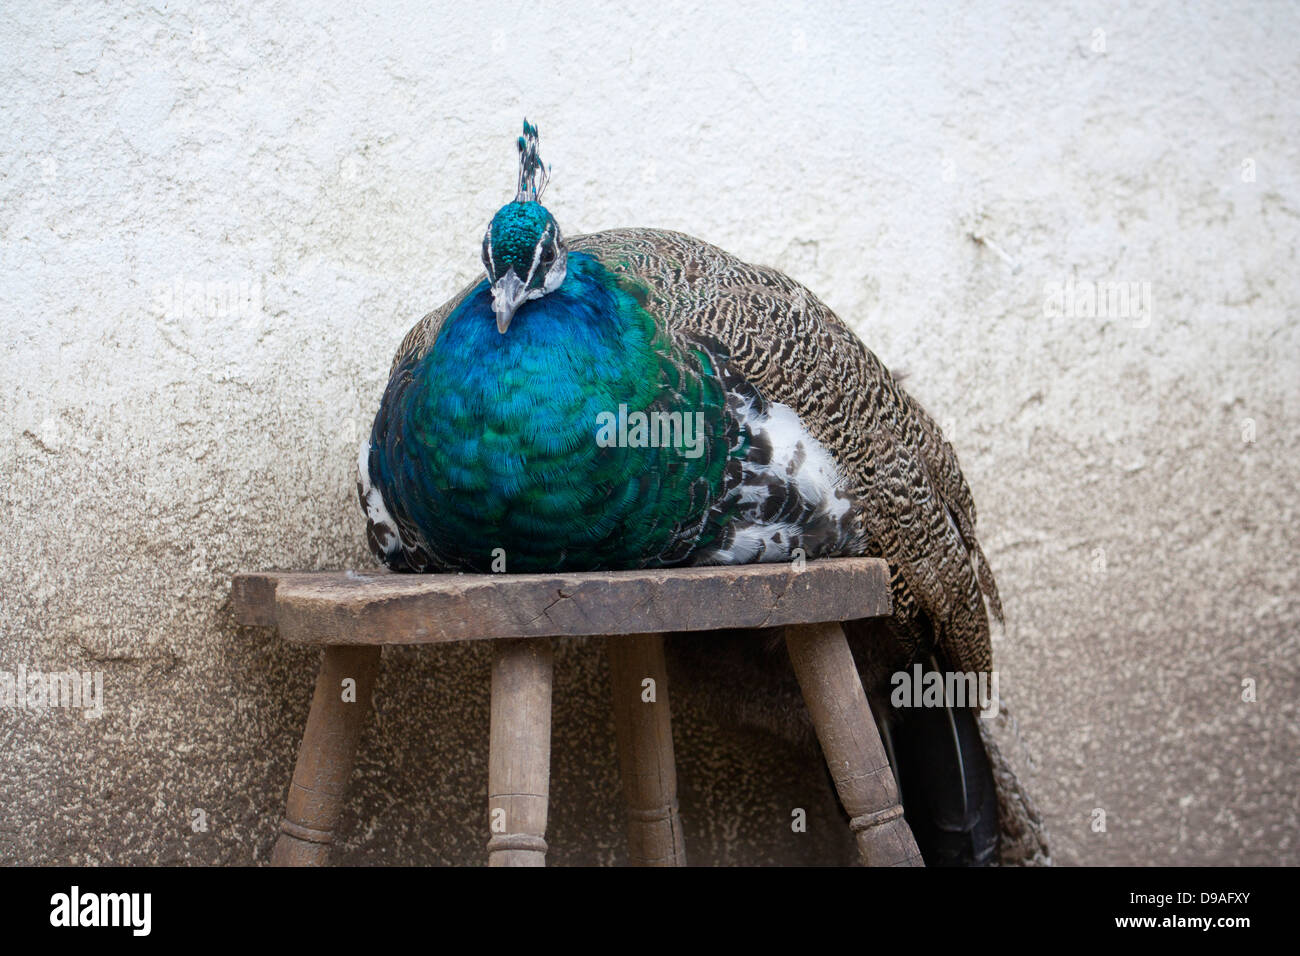 Male peacock Indian peafowl Pavo cristatus sitting seated on wooden stool with whitewashed wall in background Stock Photo